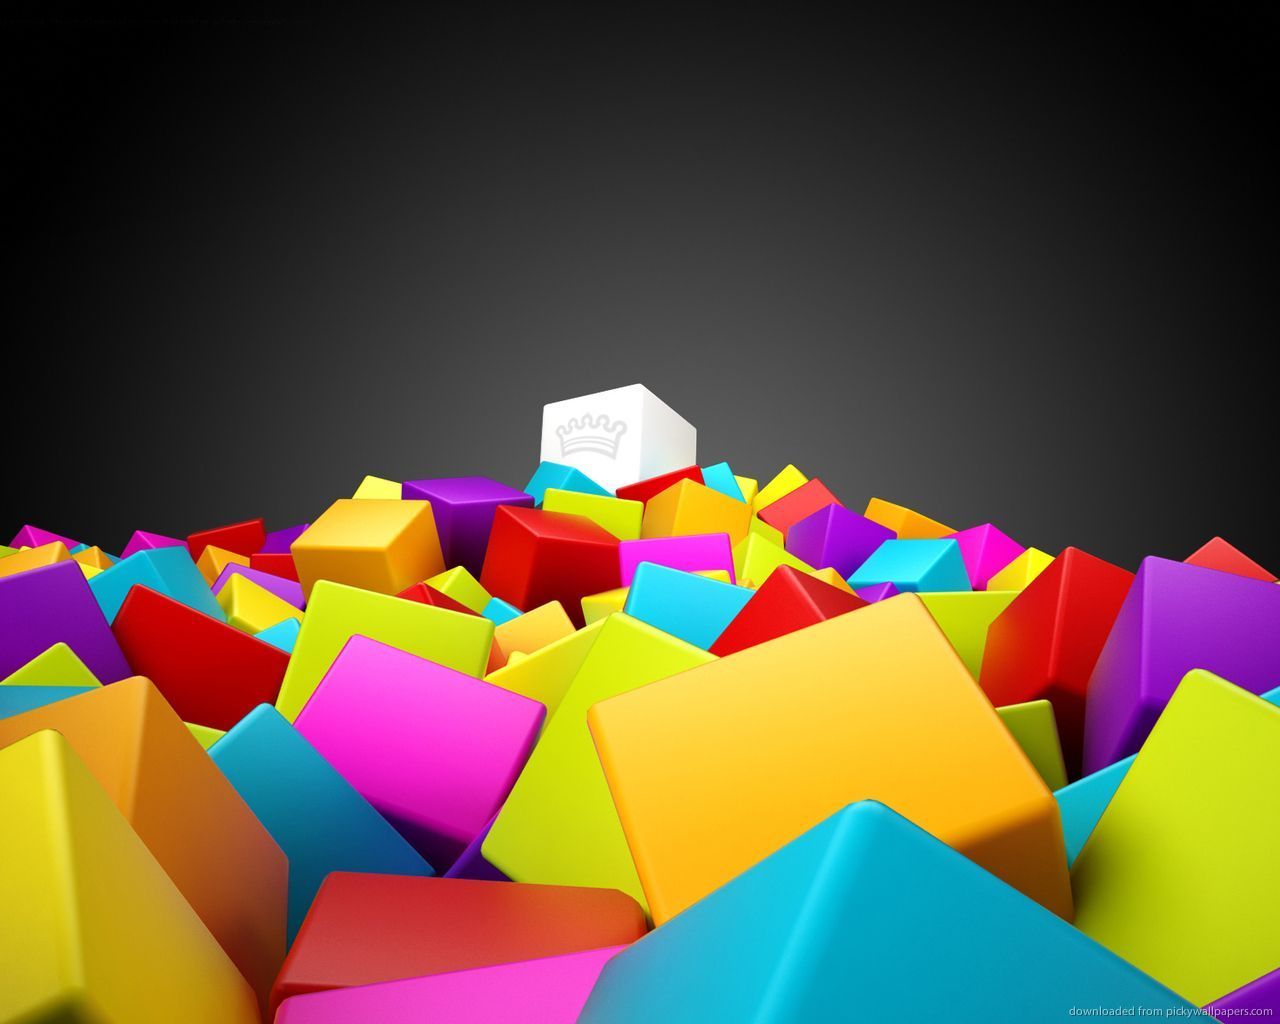 Cool Wallpaper 3d Box Colorful. #2169 | wallpaperwide